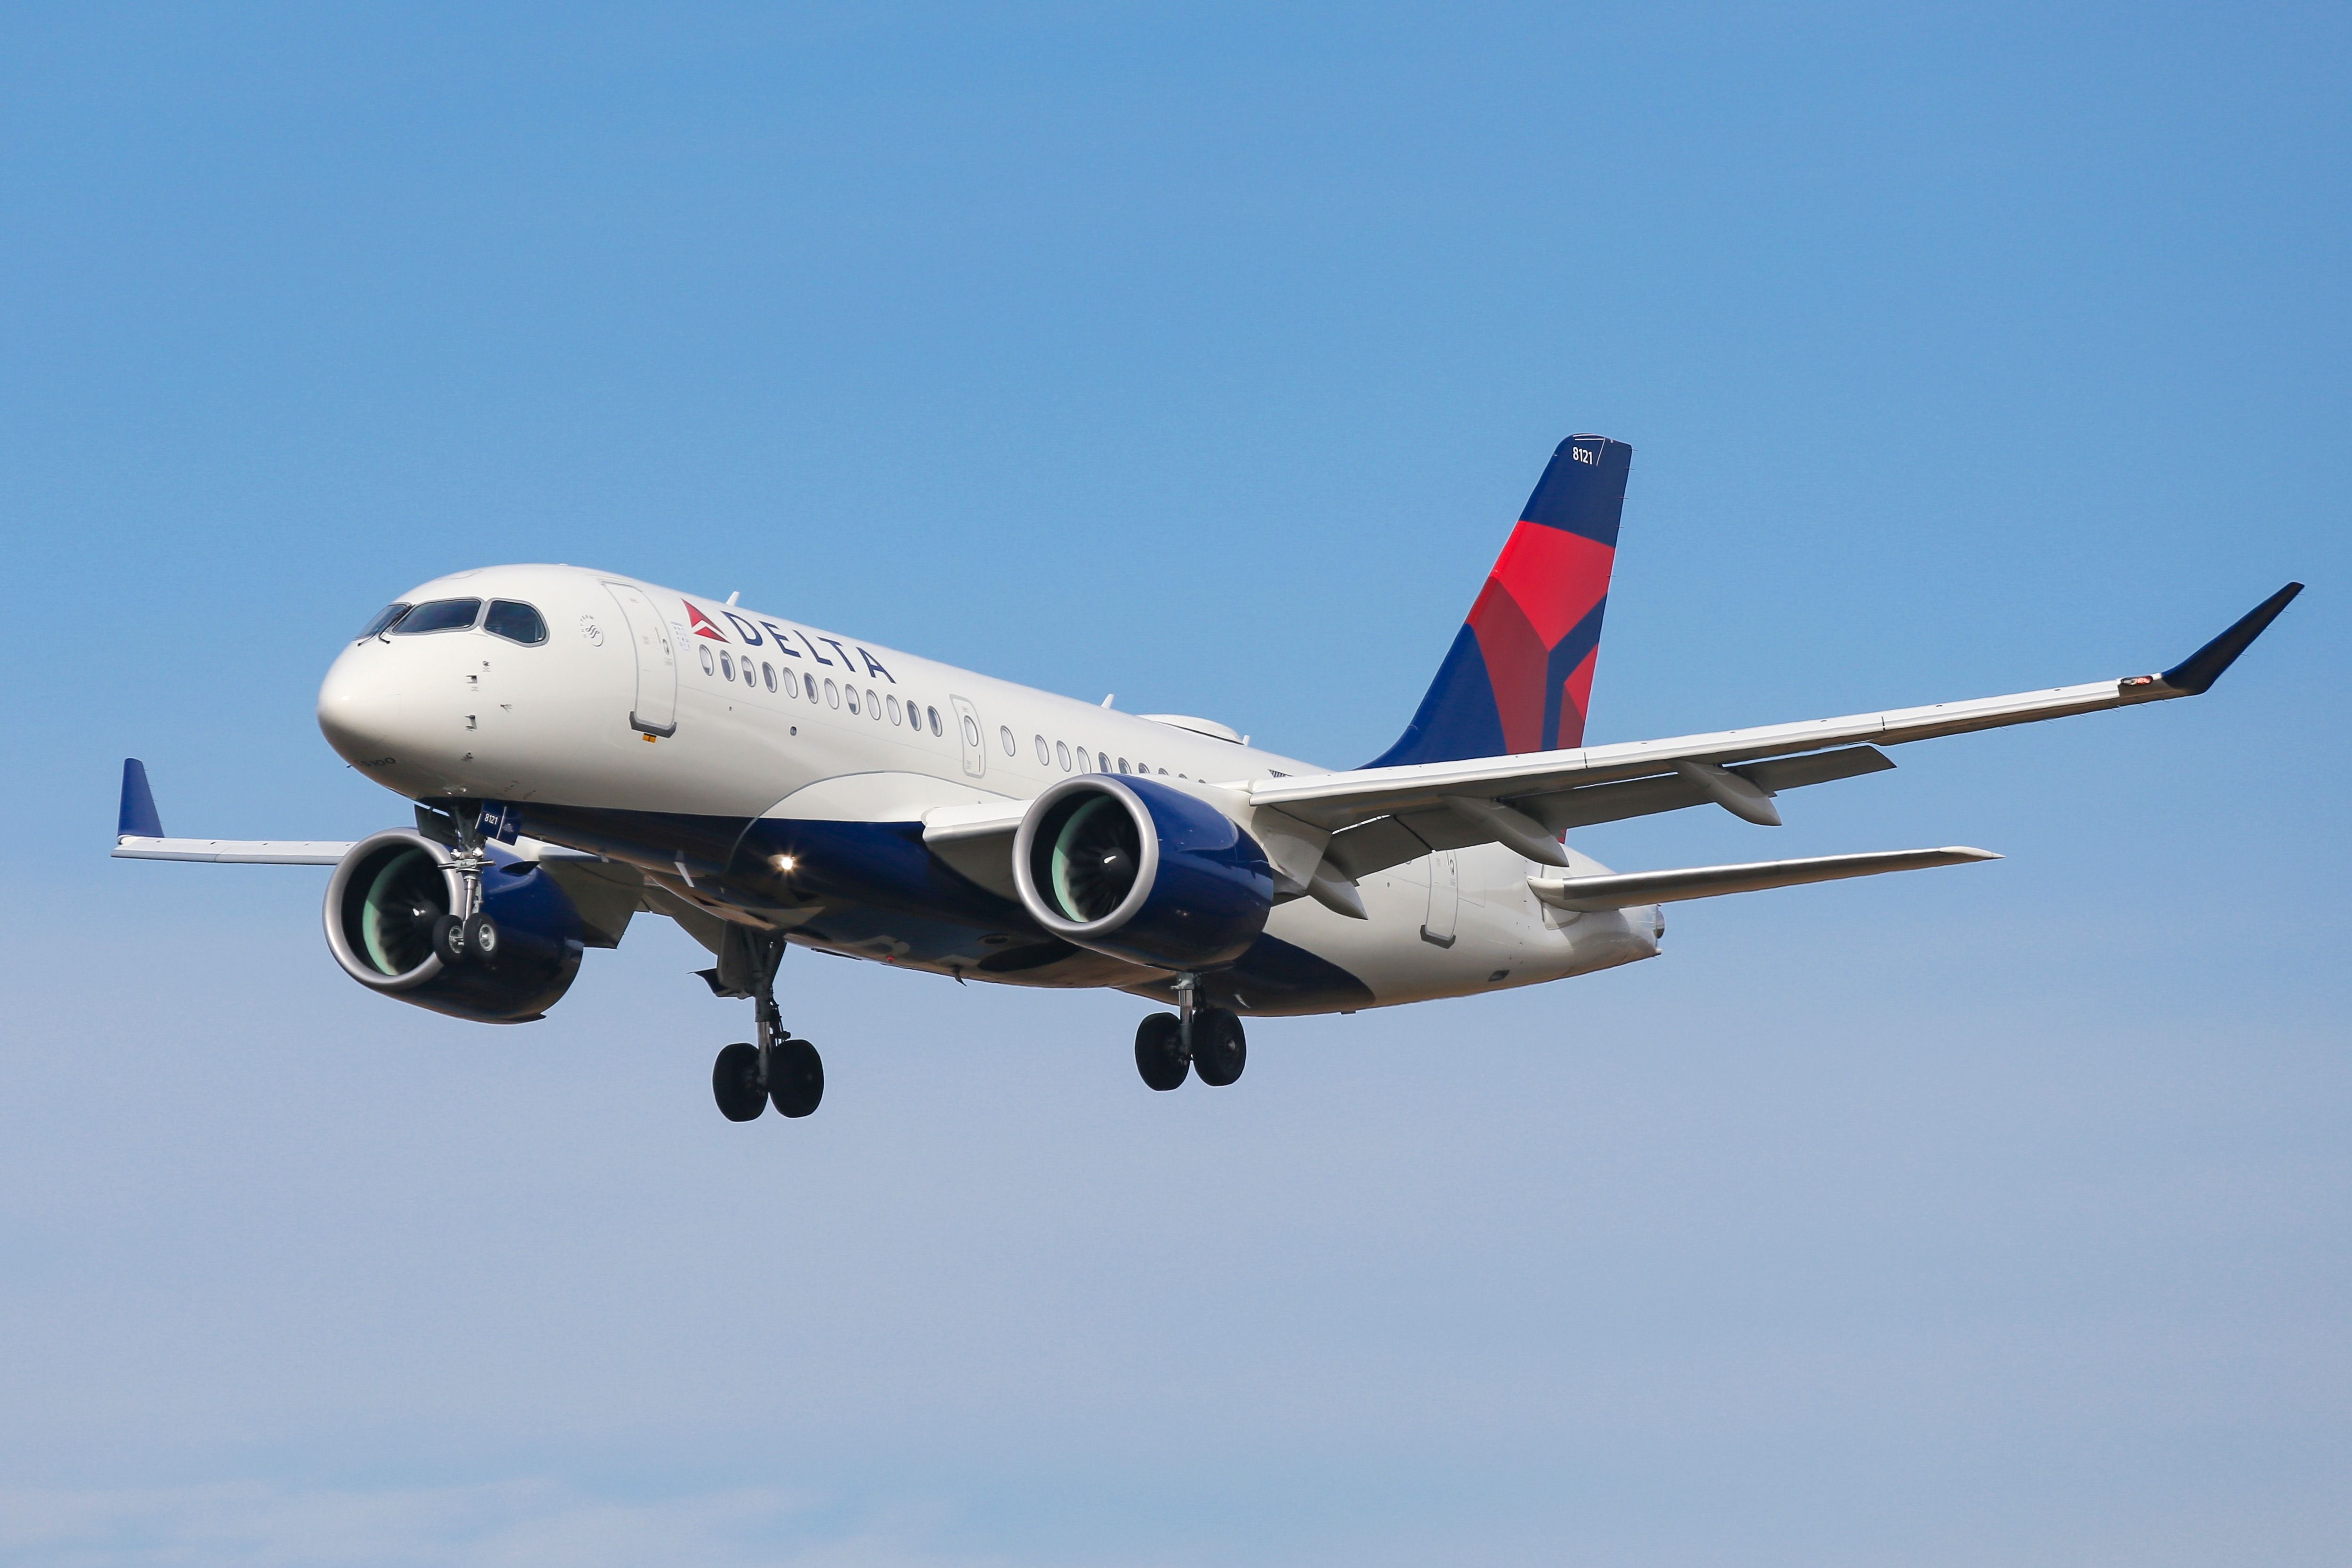 A Delta Air Lines Airbus A220-100 flying in the sky.